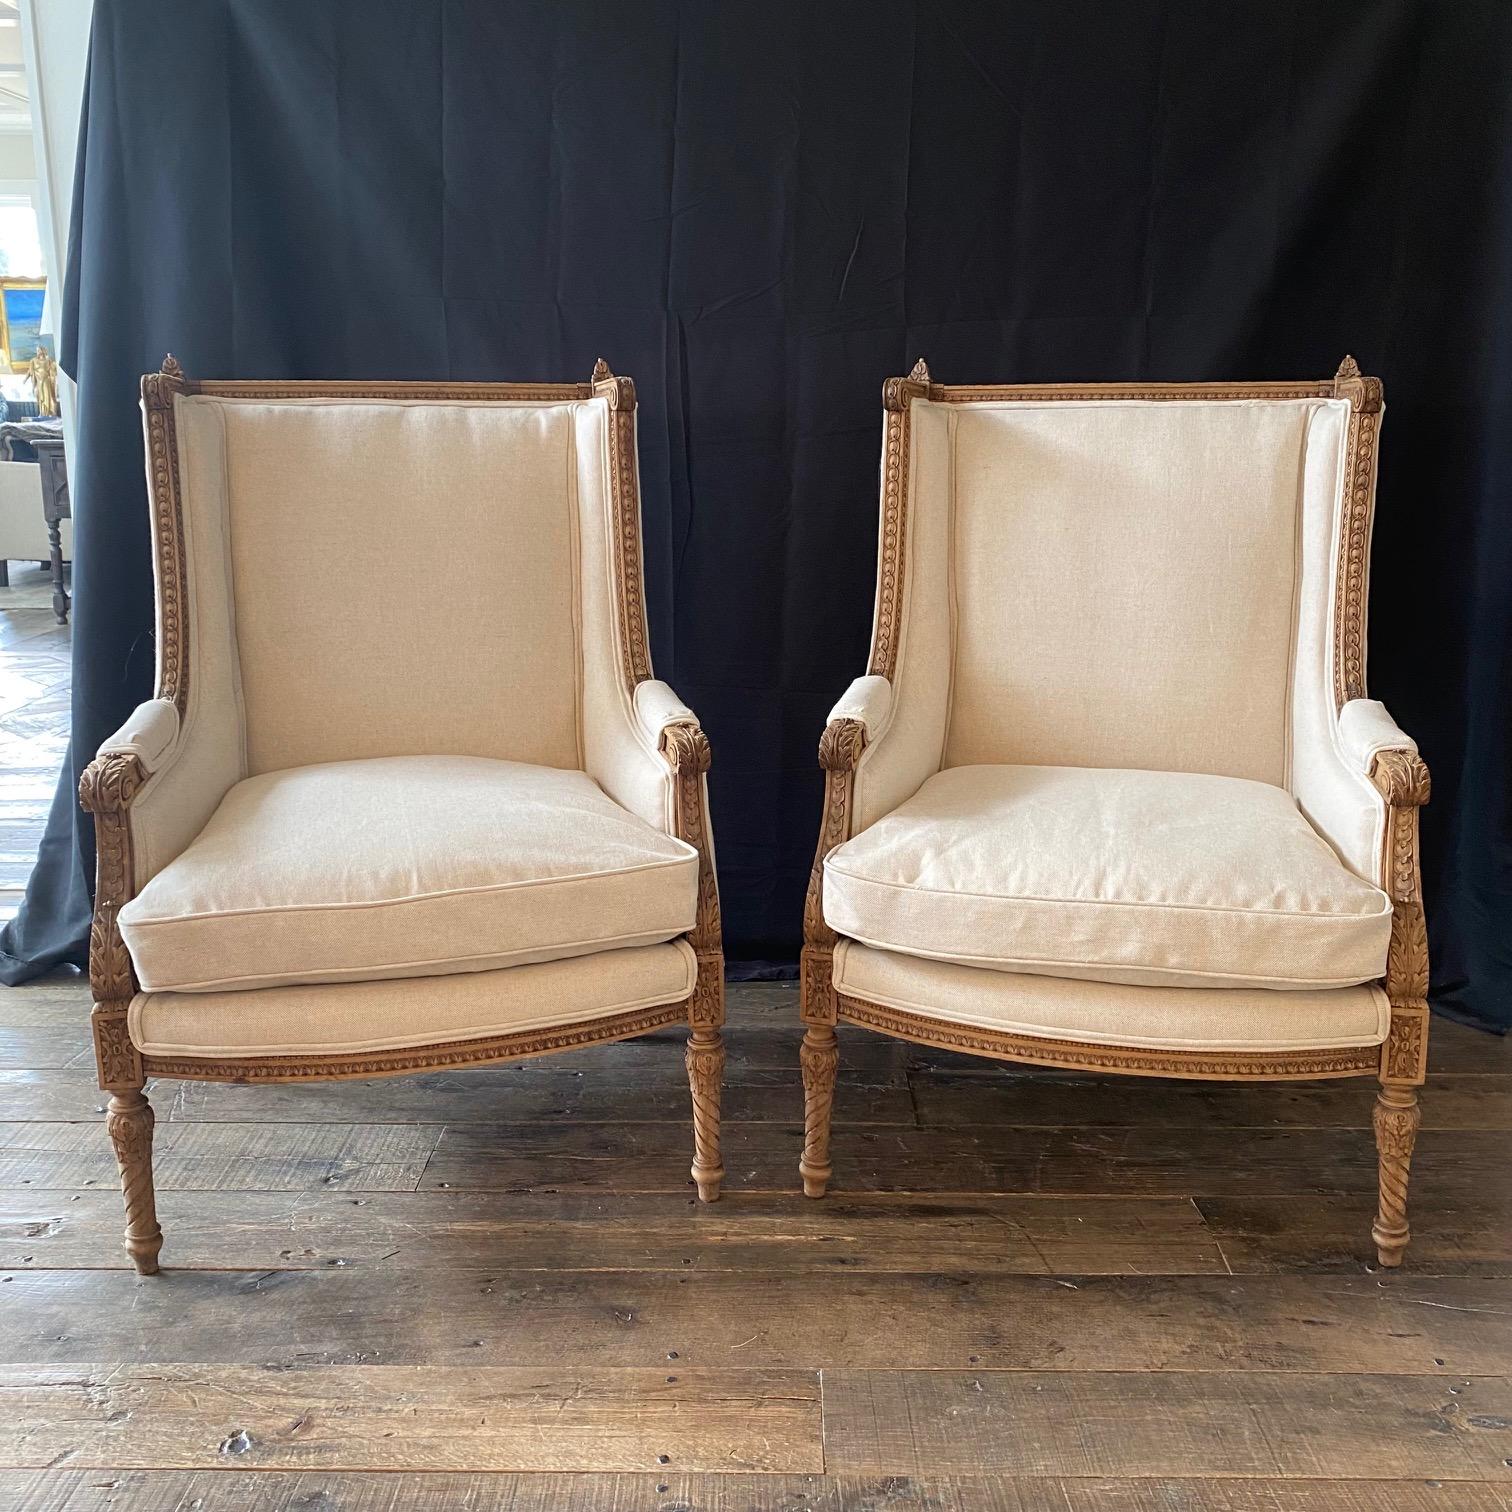 Elegant antique pair of French Louis XV style walnut wingback bergères from the 19th century, with completely carved frame décor, new neutral high end upholstery and Louis XV classic features. Each chair features a wingback, designed to give more